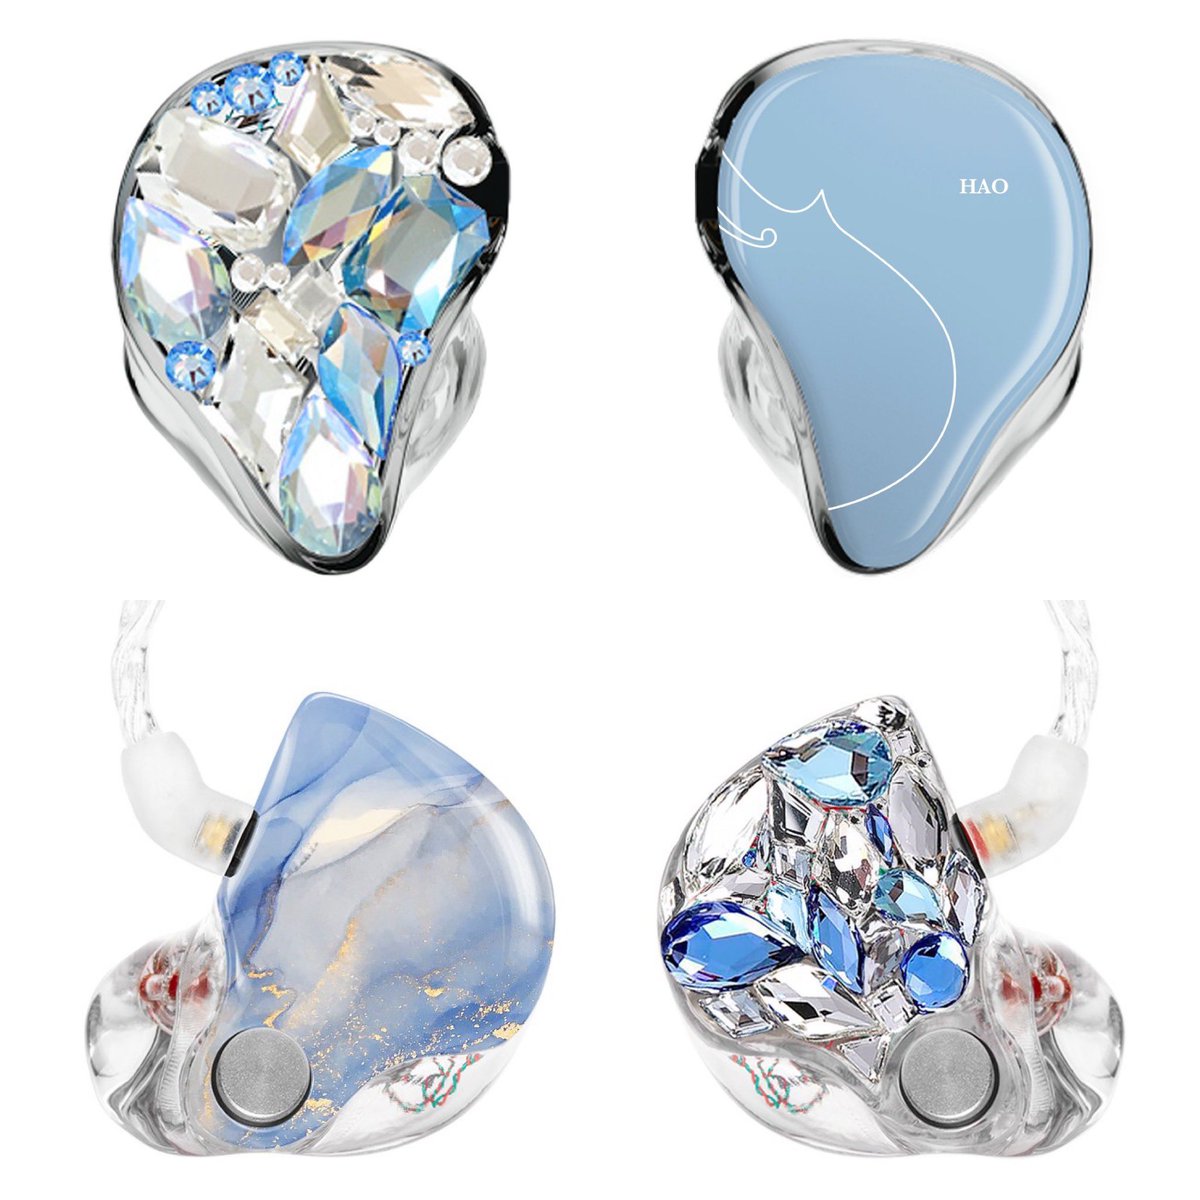 hao and hanbin’s in ear designs… the way they match and are so beautiful…🥲🤍